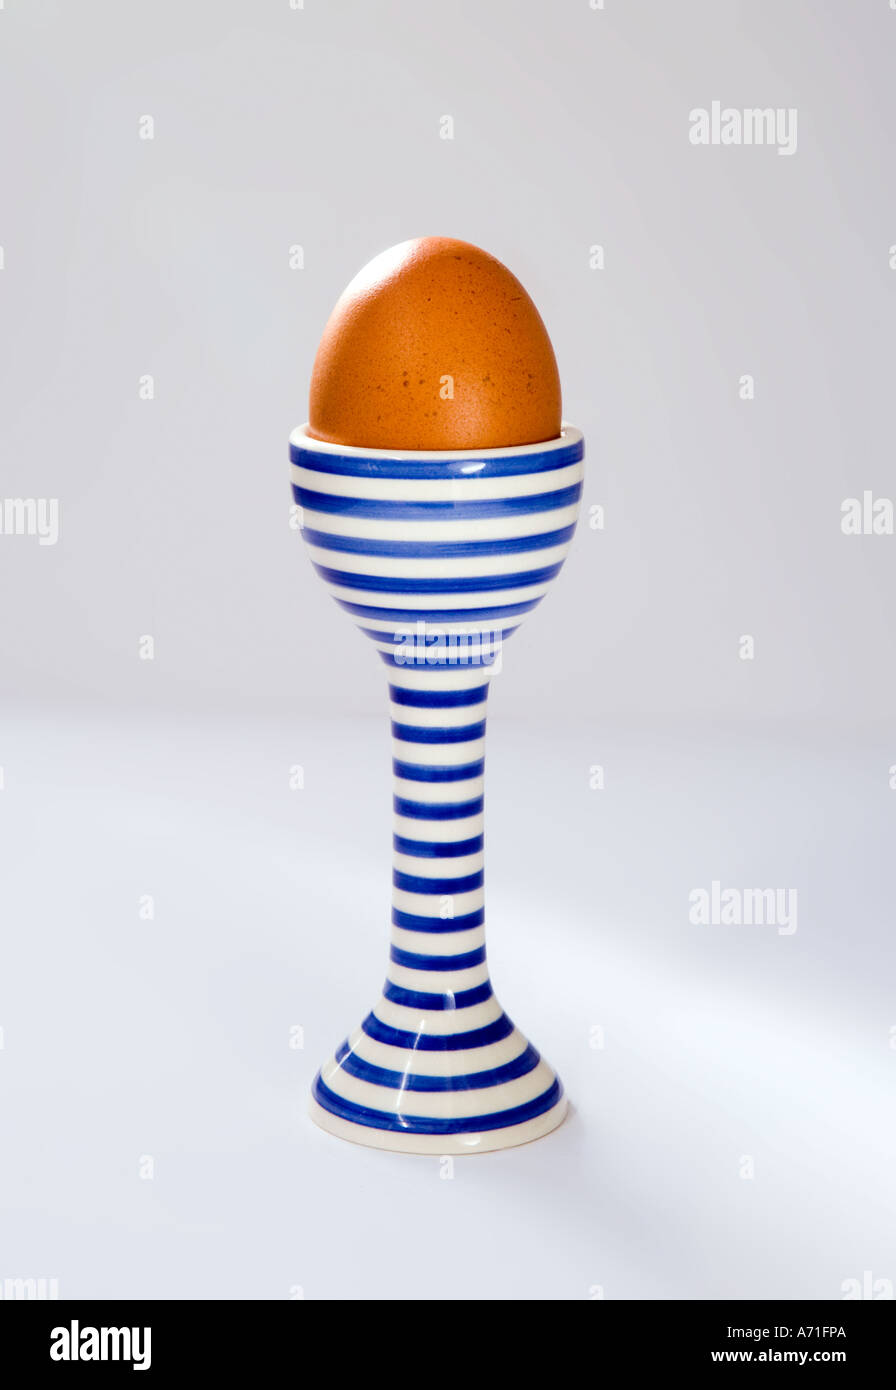 A boiled egg in a blue and white stripey egg cup on white background. Stock Photo